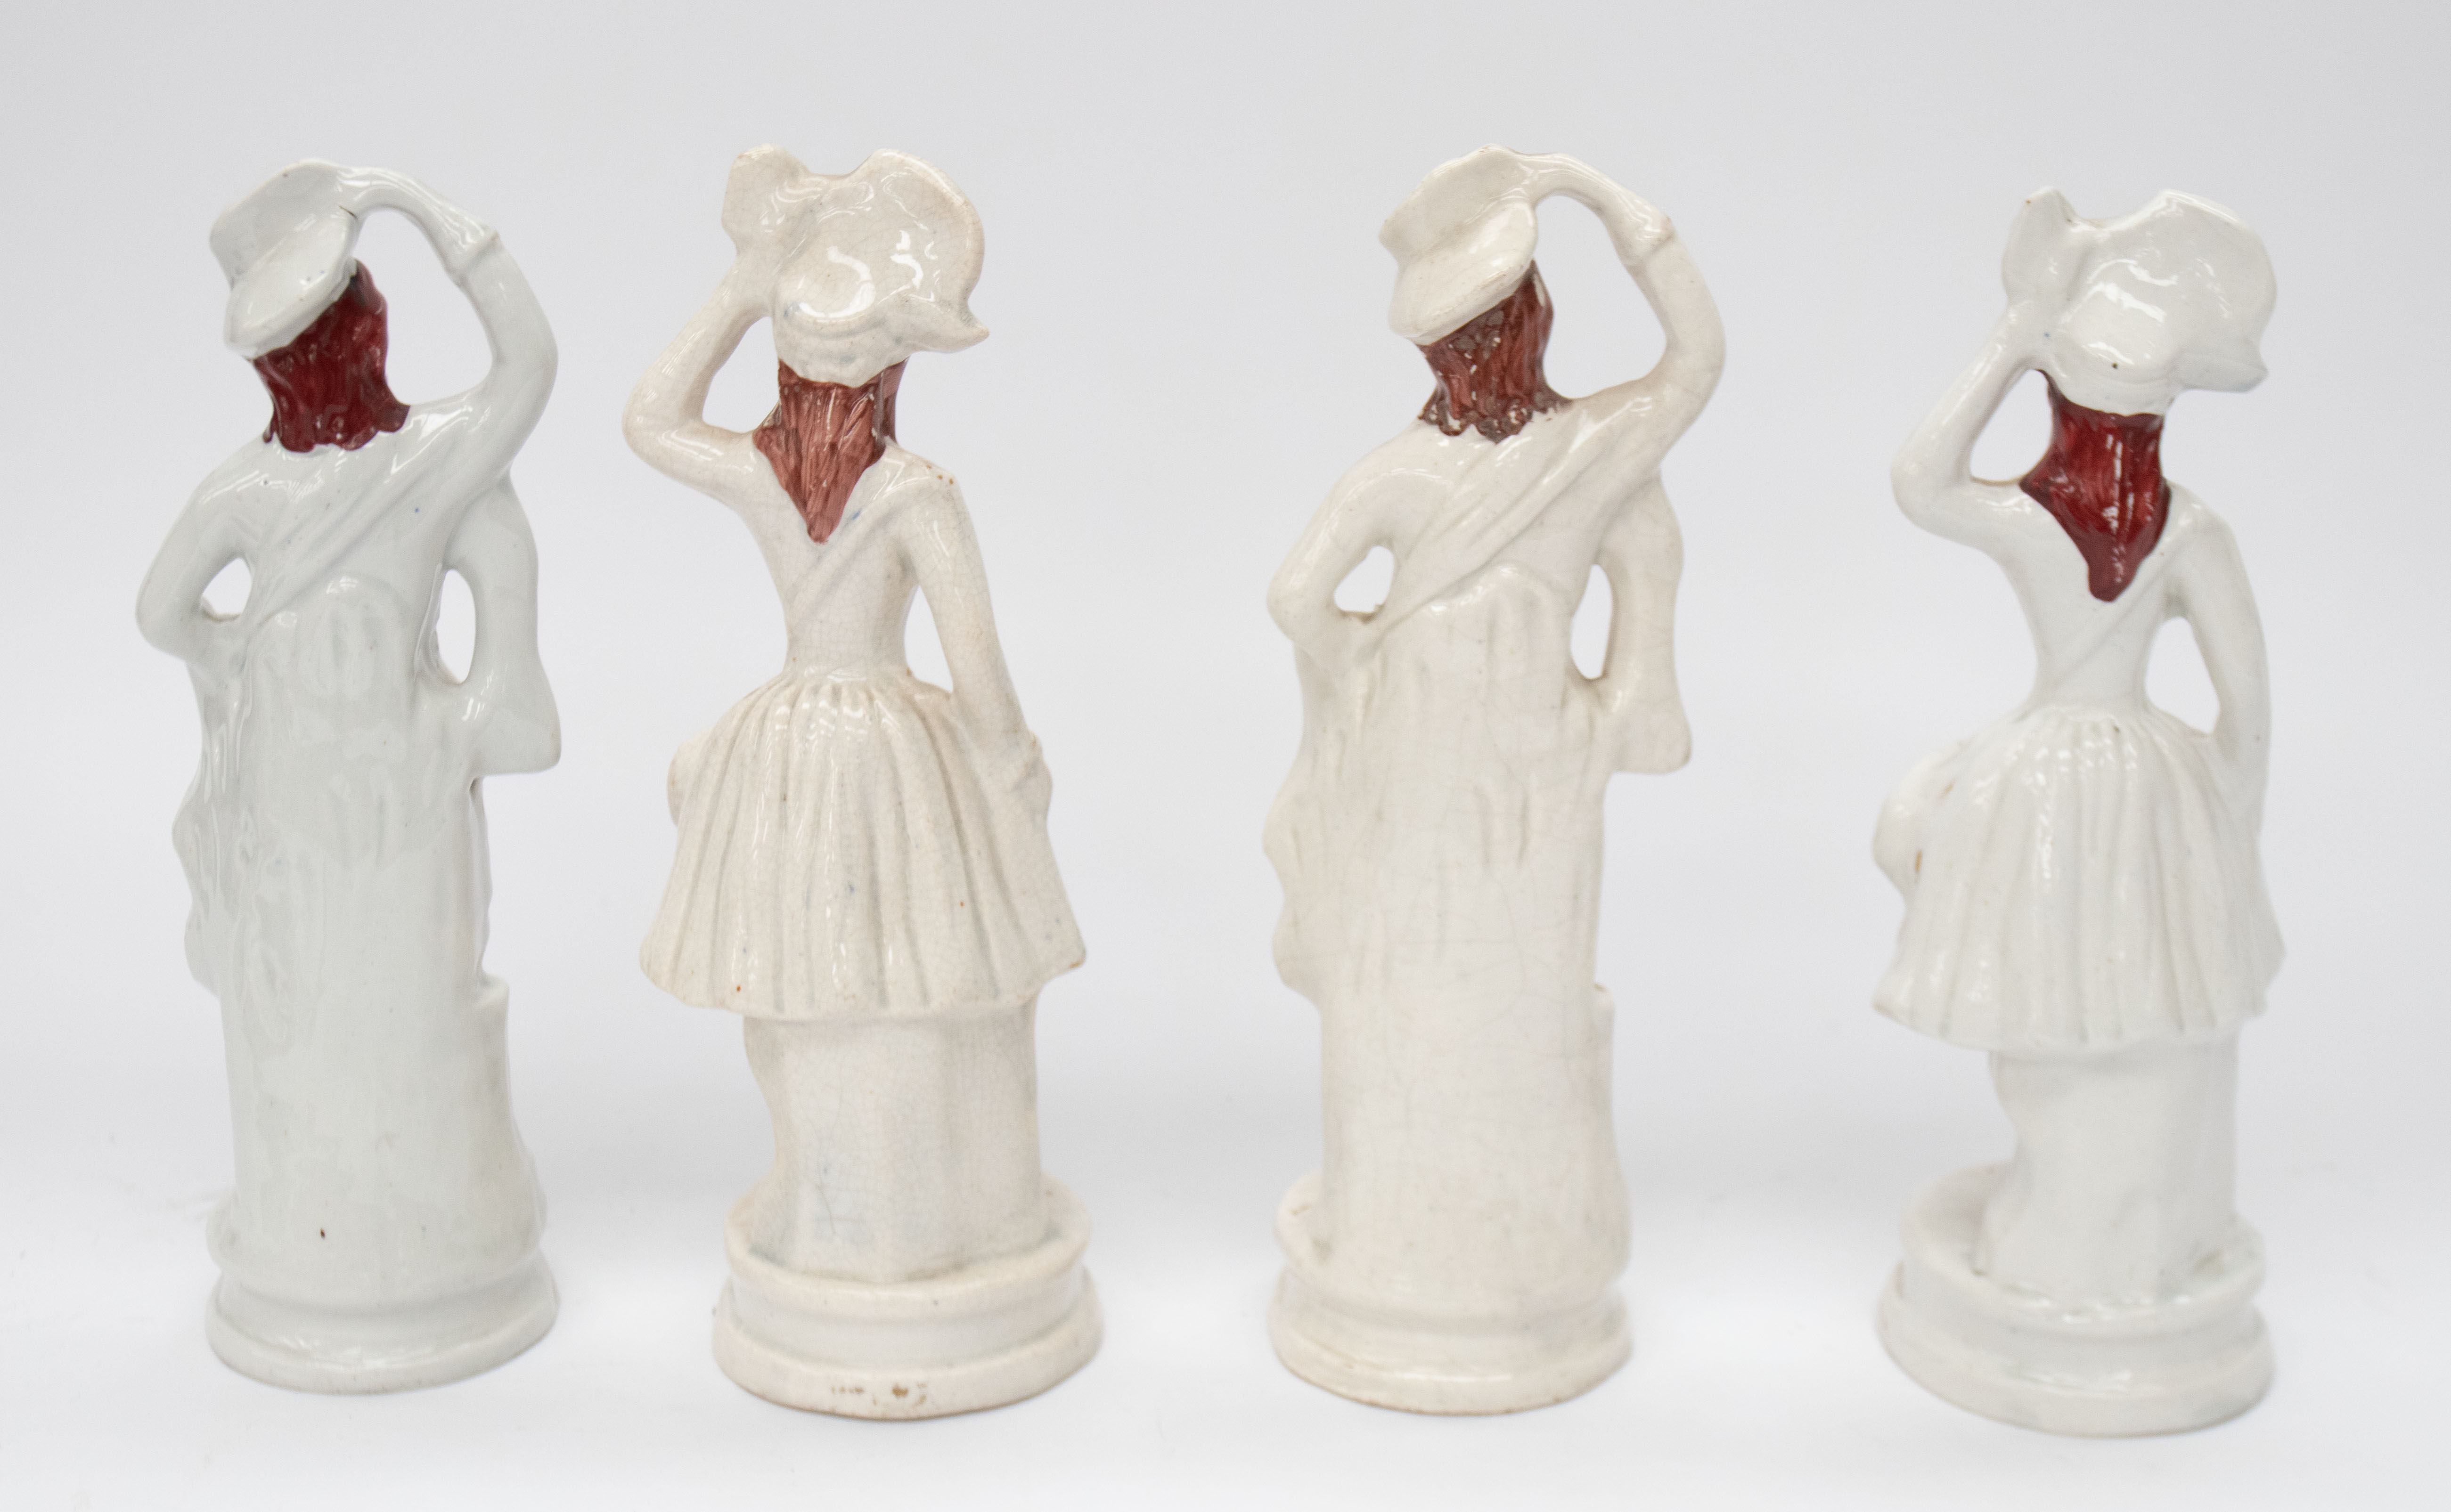 Four similar Staffordshire figures, all Ladies in white dress and hand on hats. Some cracking, wear, - Image 2 of 3